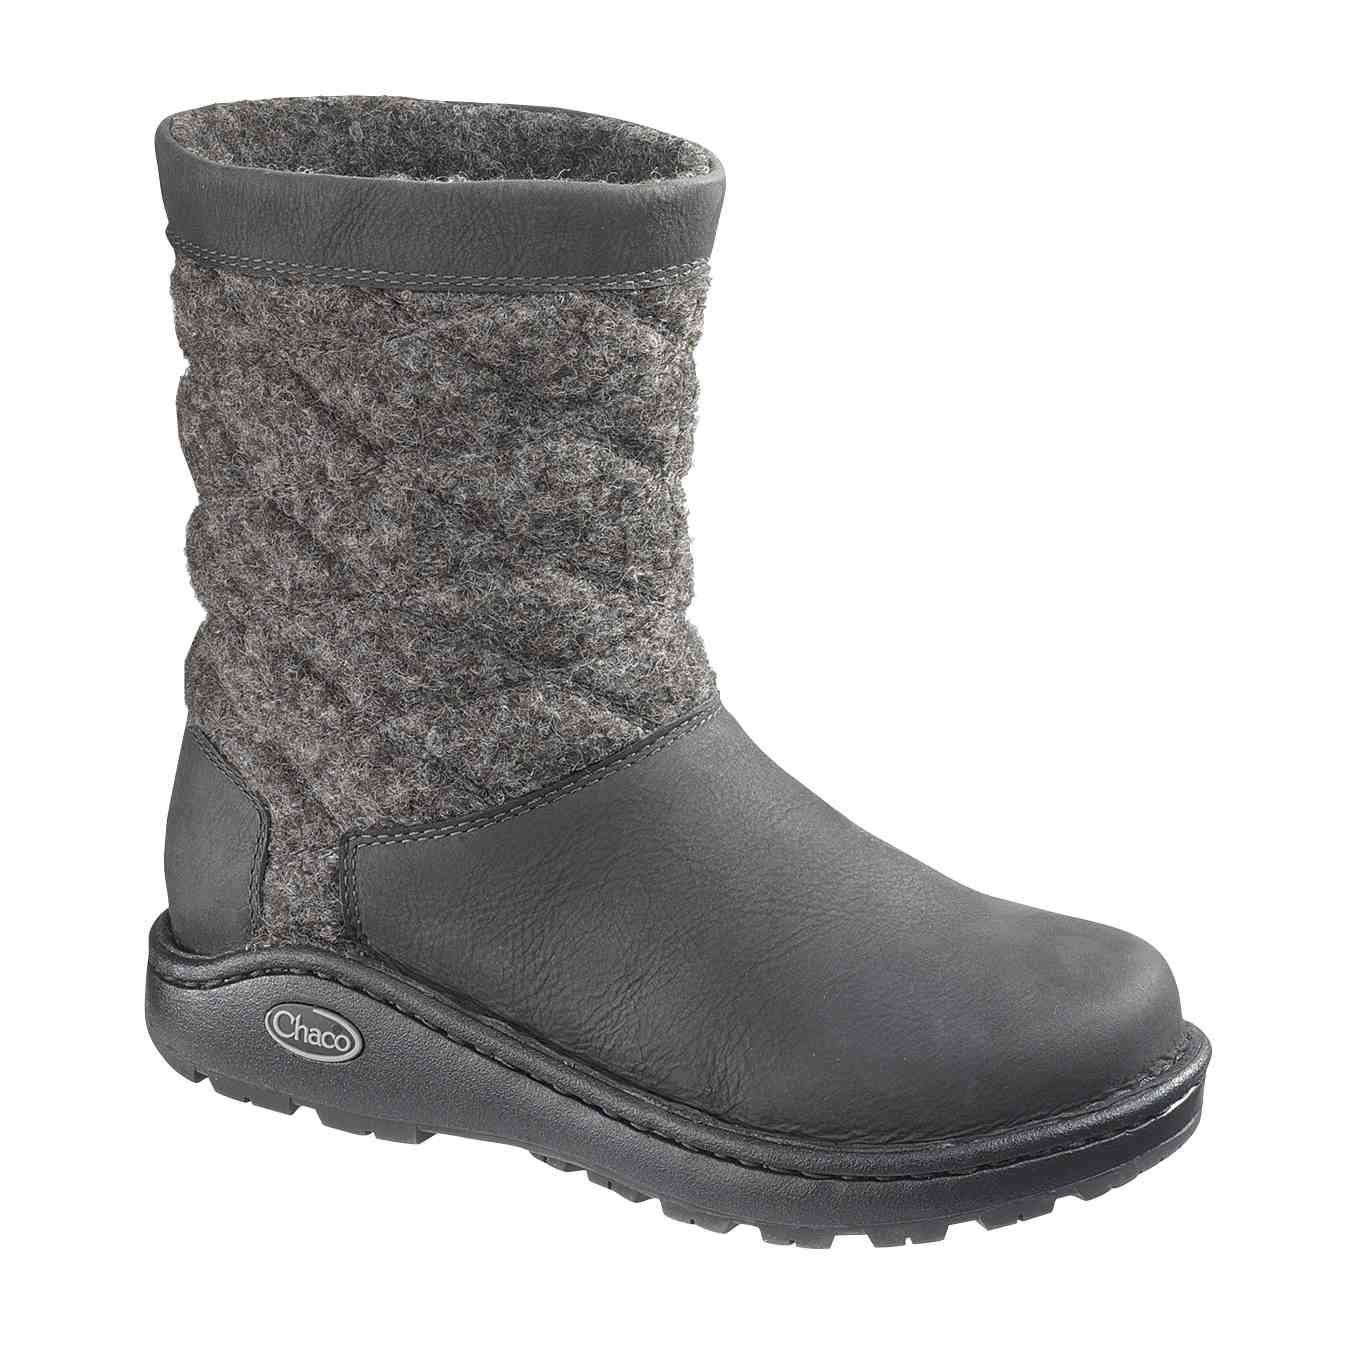 Chaco Arbora Wool boot for women 